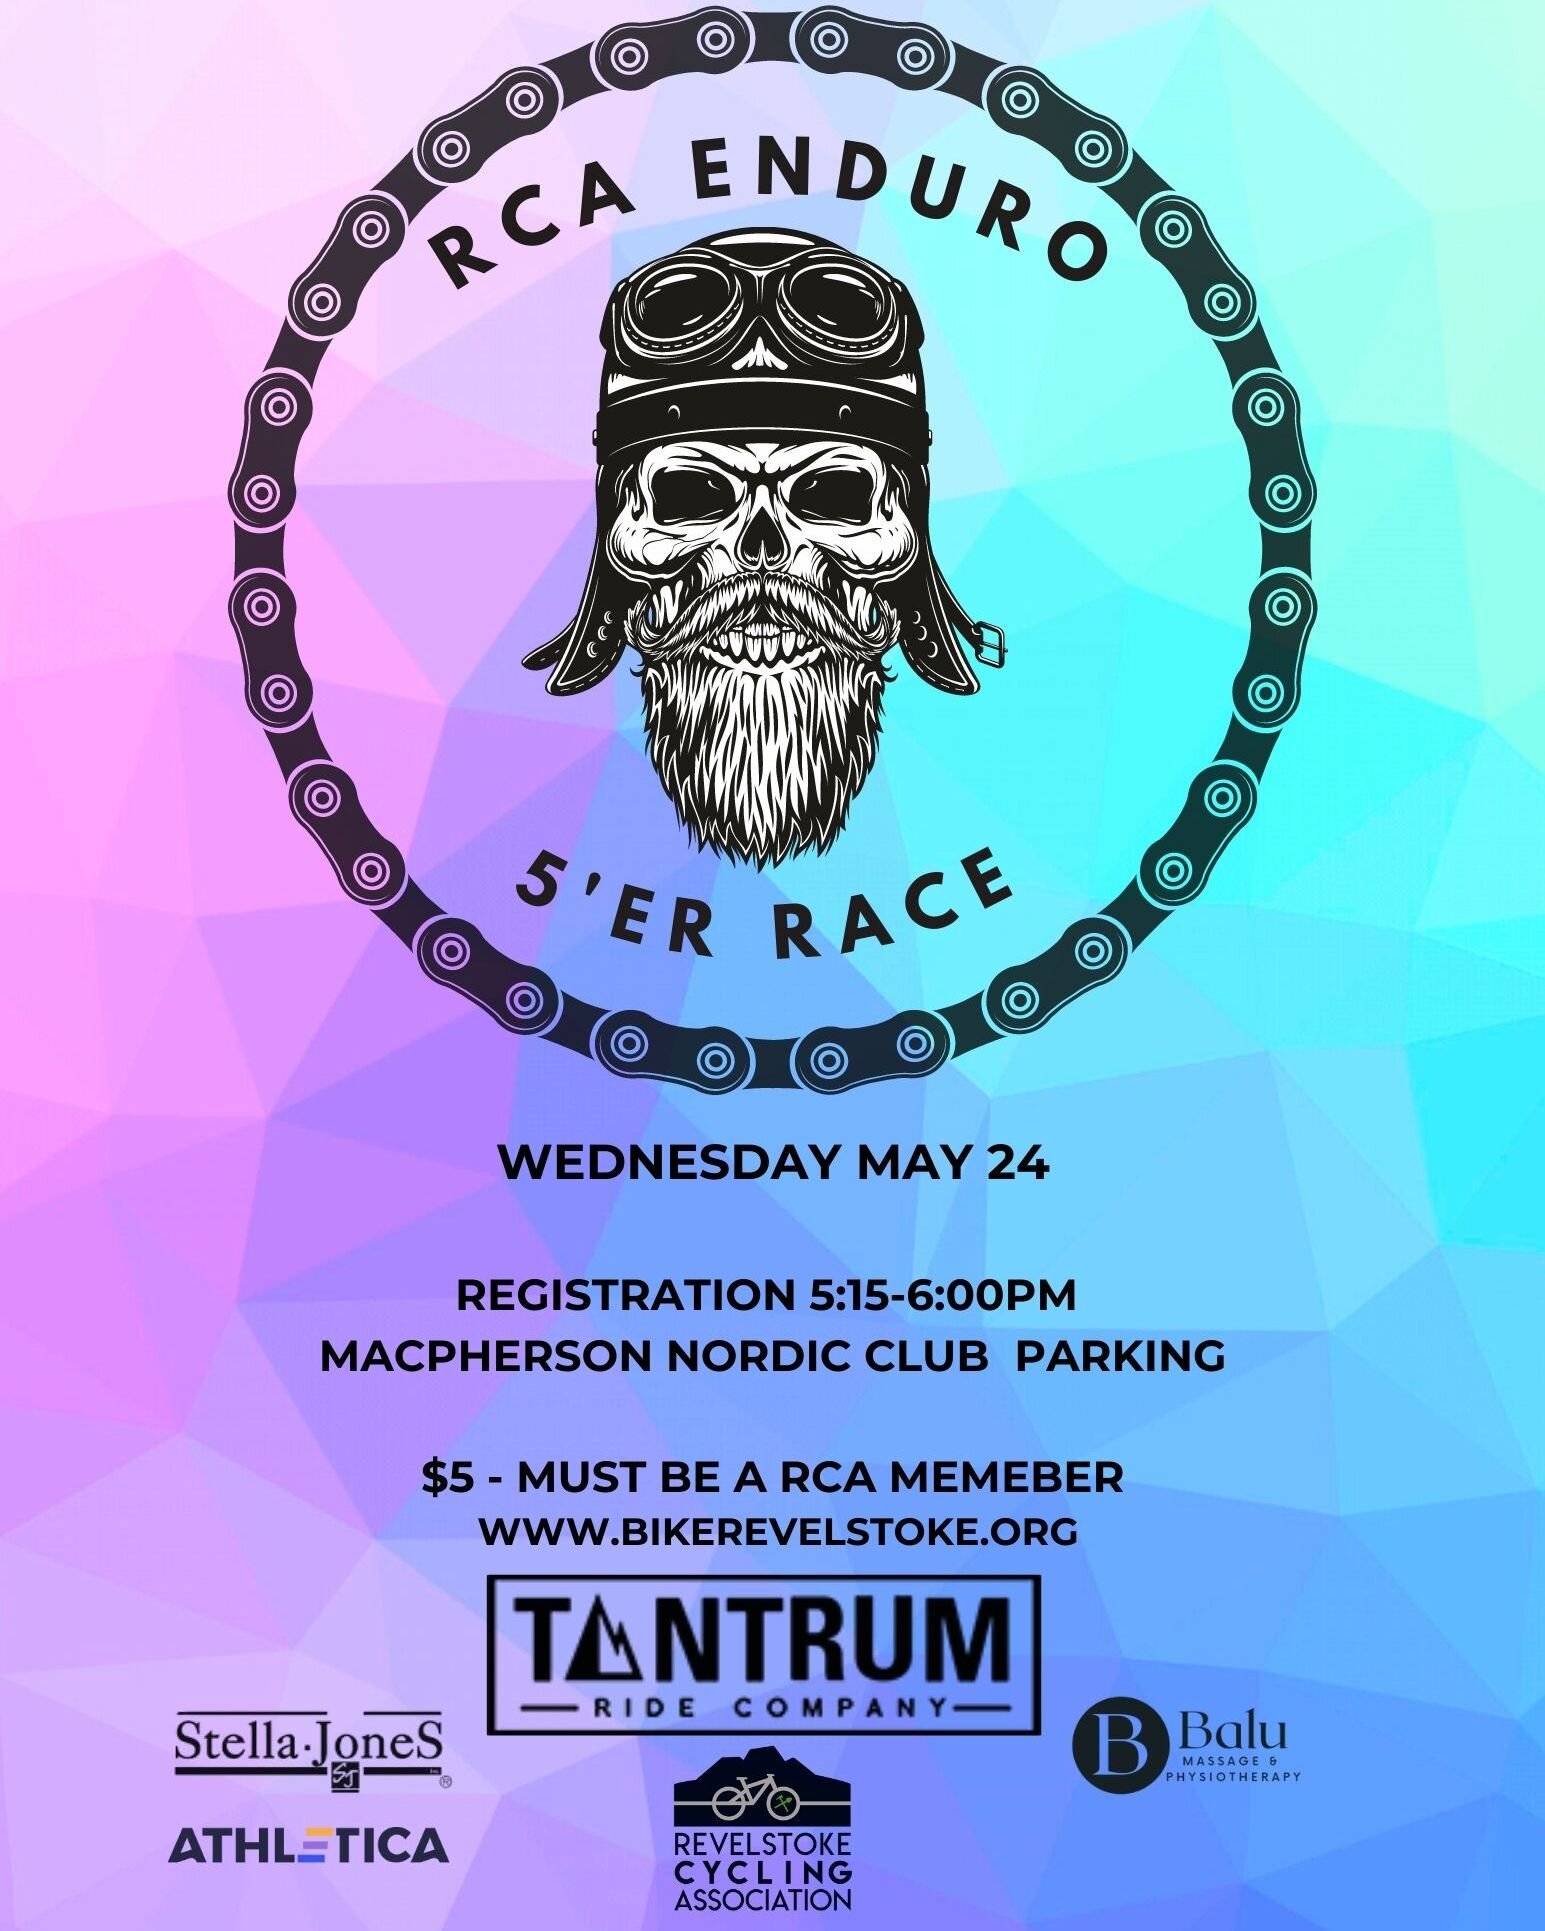 It's race time! Our first Fiver of the year is this Wednesday, May 24. We're kicking things off with the Tantrum Enduro on Lower Macpherson. Registration is at the Nordic Lodge parking from 5:15-6 p.m. and racing will take place below the highway. Th